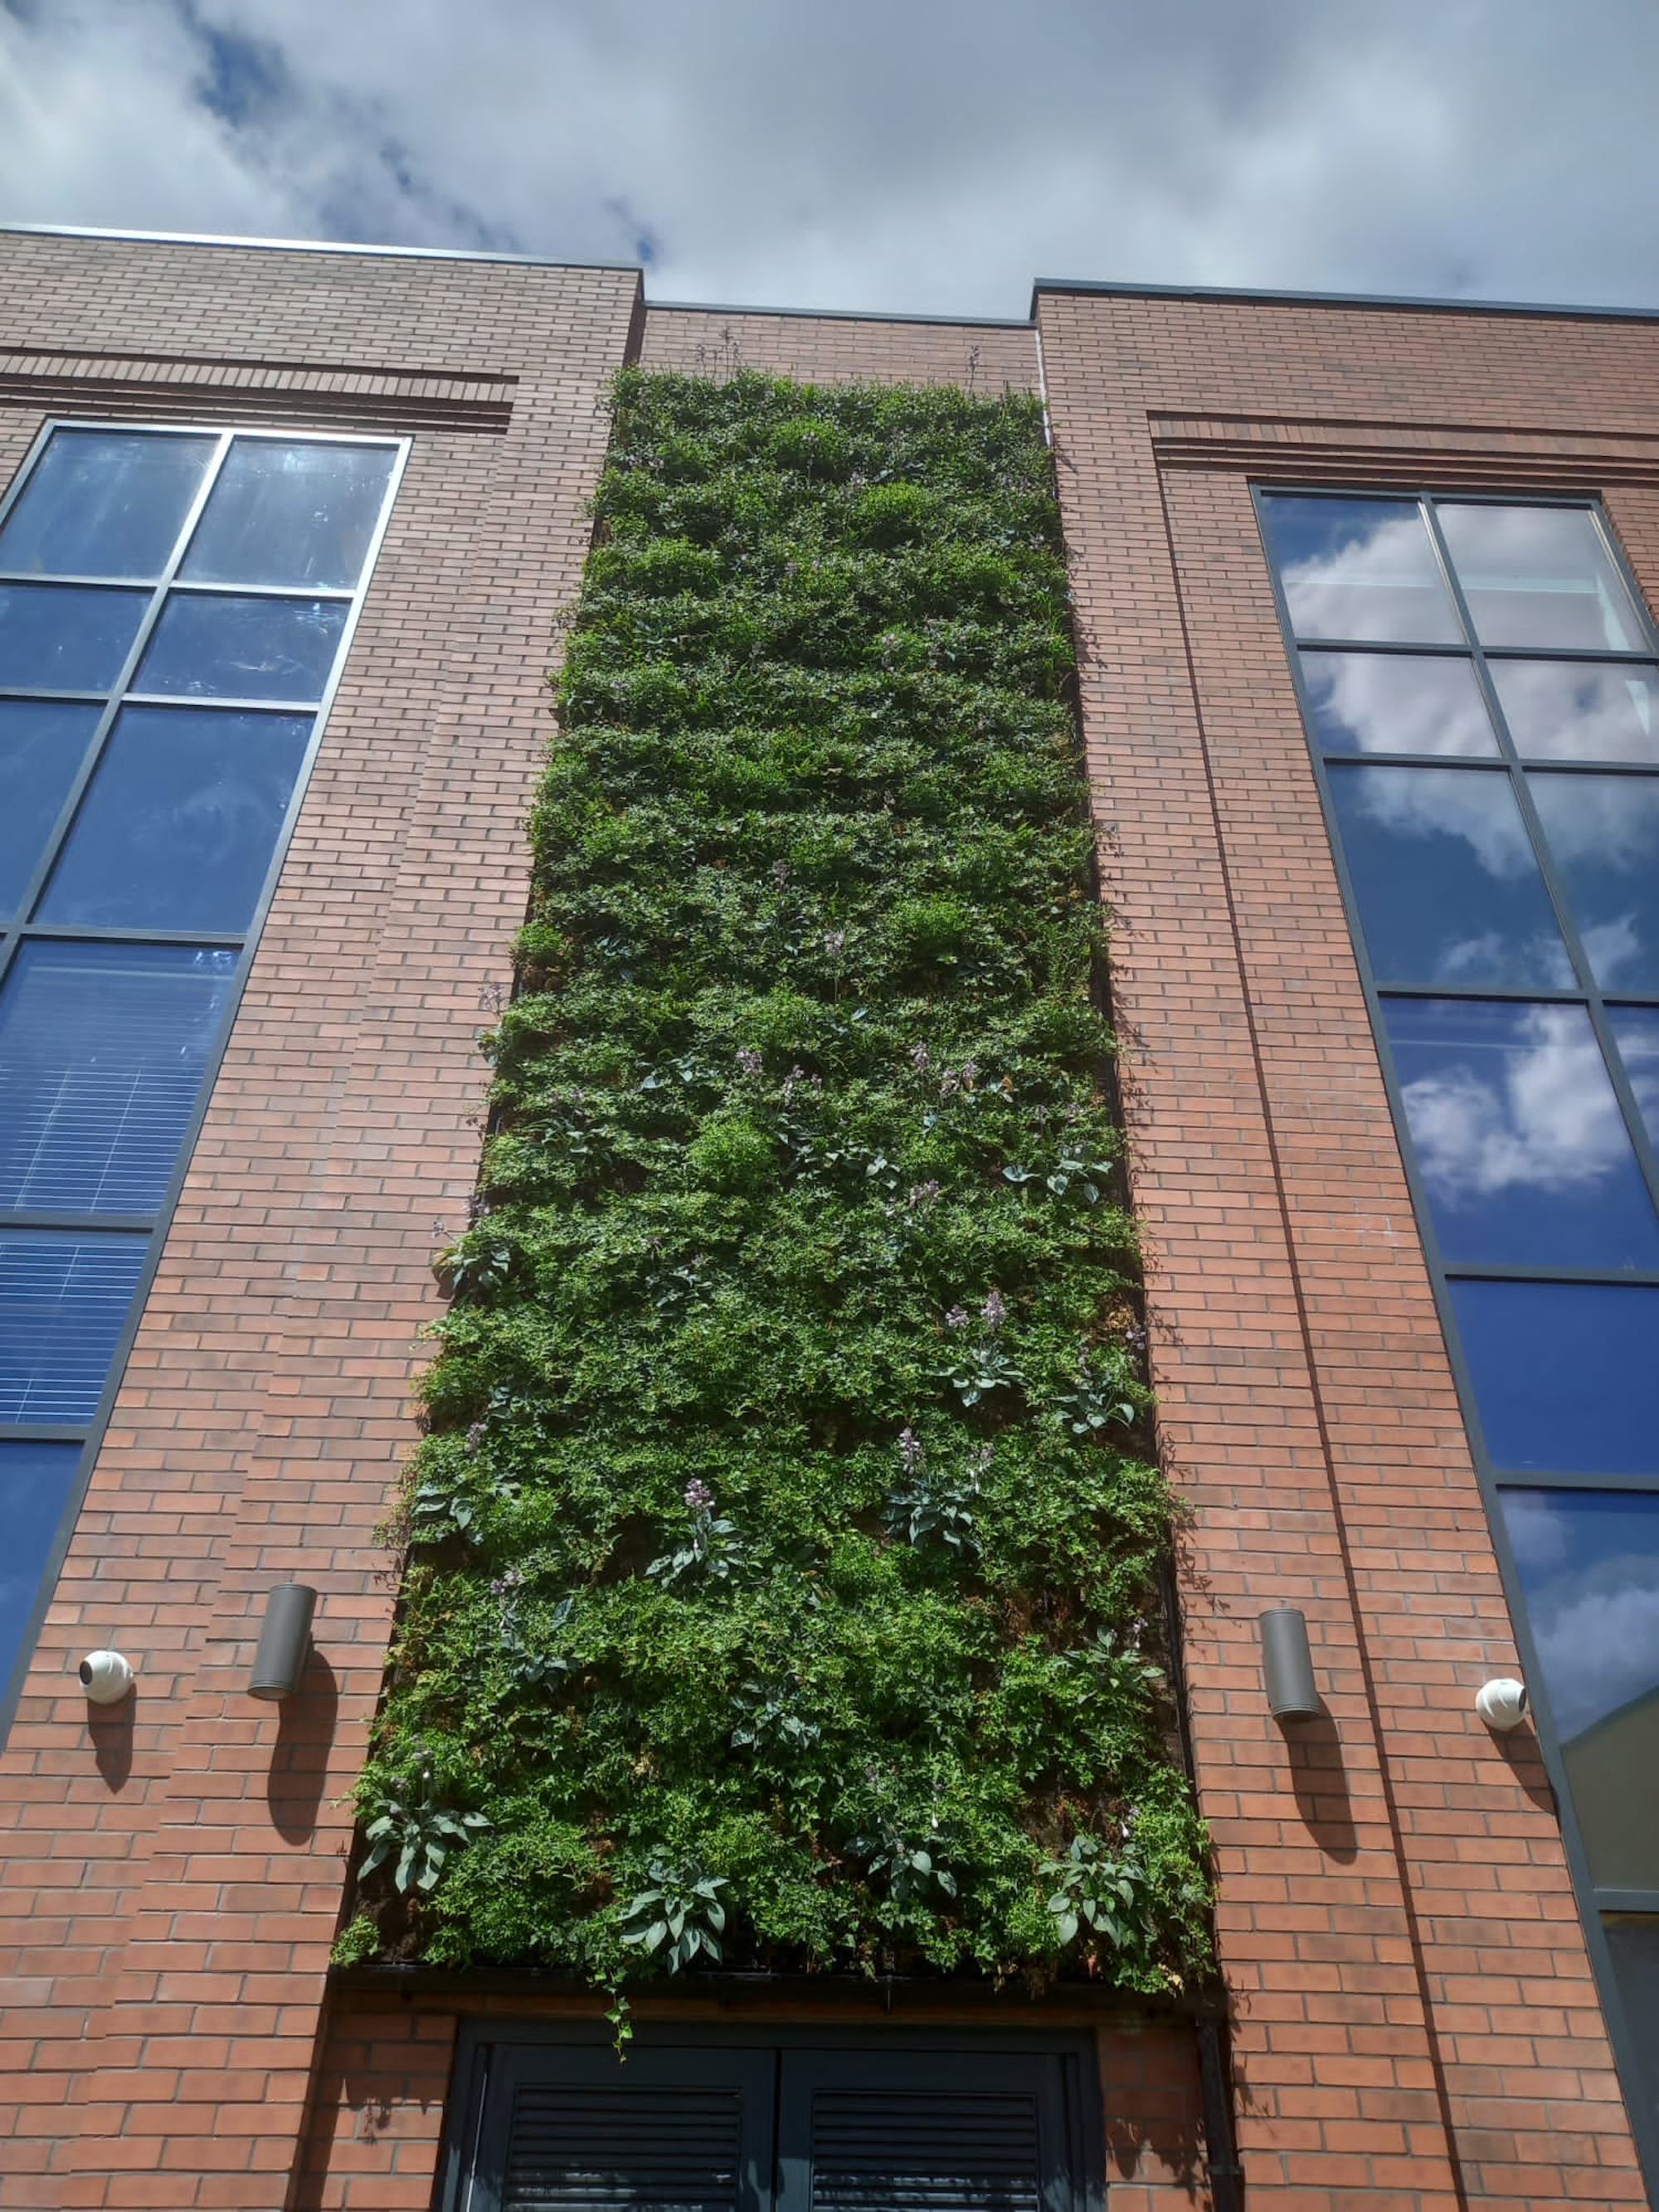 From-the-ground view of Lincoln living wall